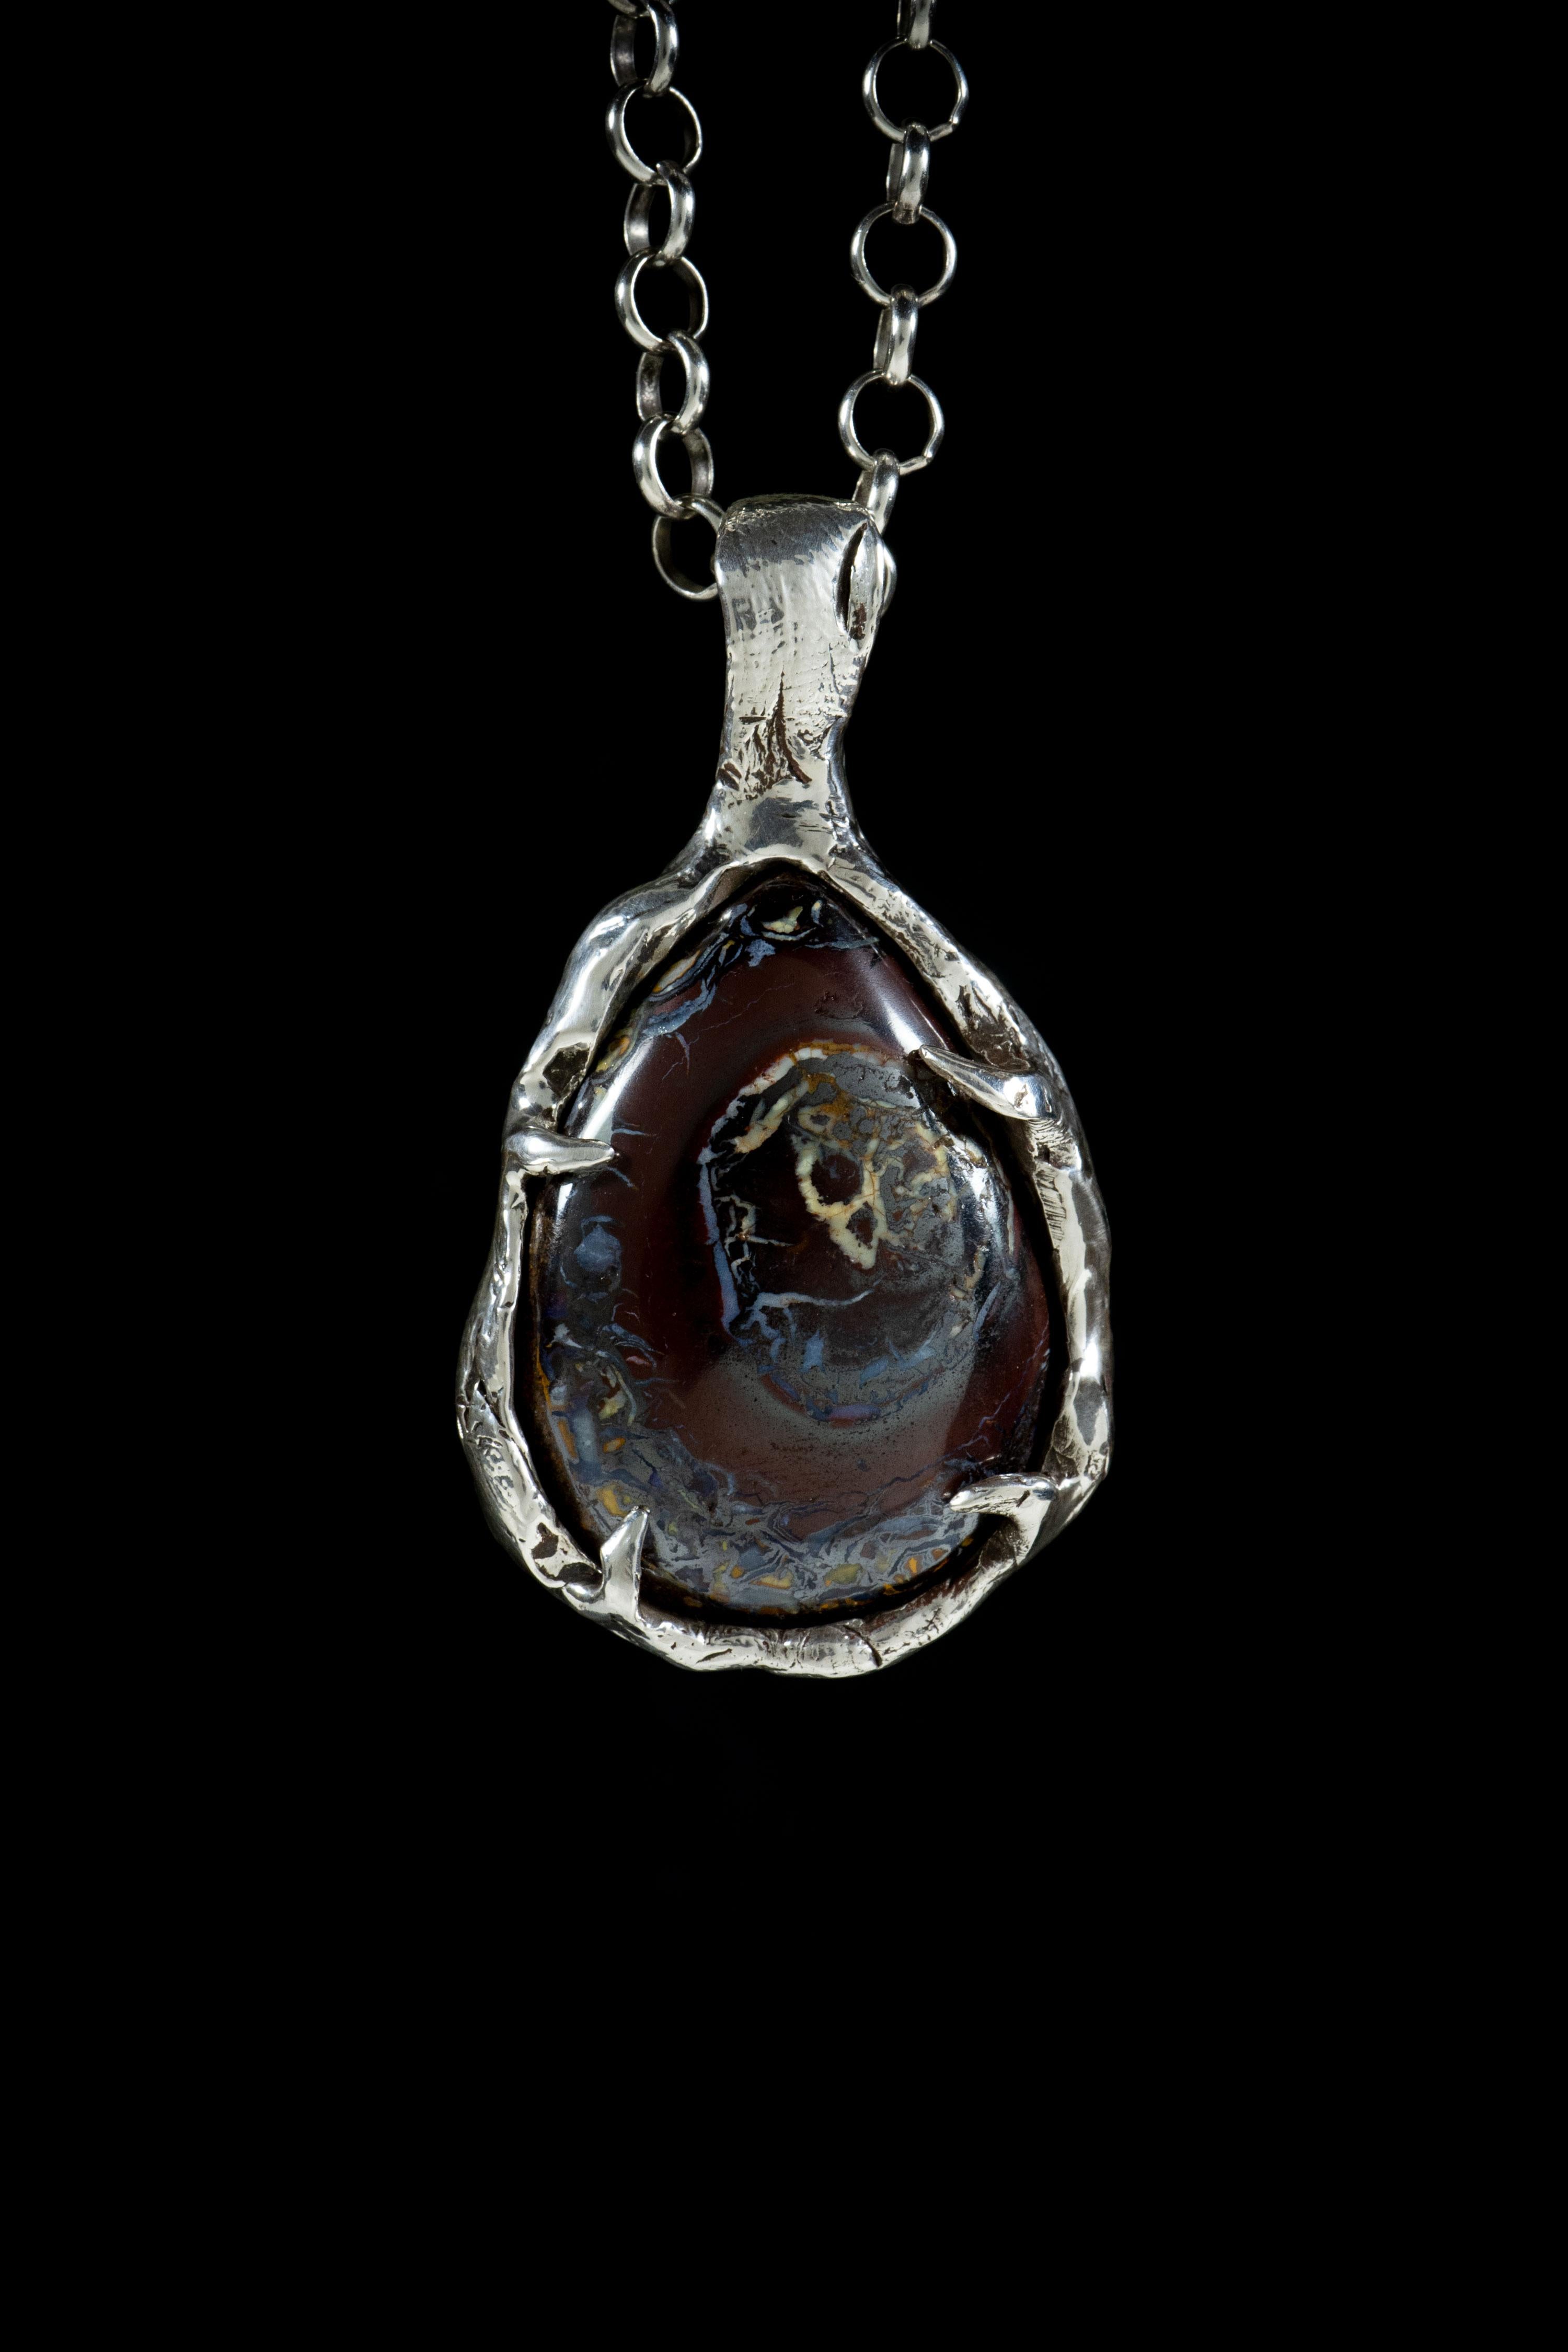 Formation of a Planet is a stunning and unique pendant handcrafted by Ken Fury in sterling silver, featuring a natural Australian Koroit black boulder opal stone. The intricate design of the pendant is inspired by the formation of a planet, with the